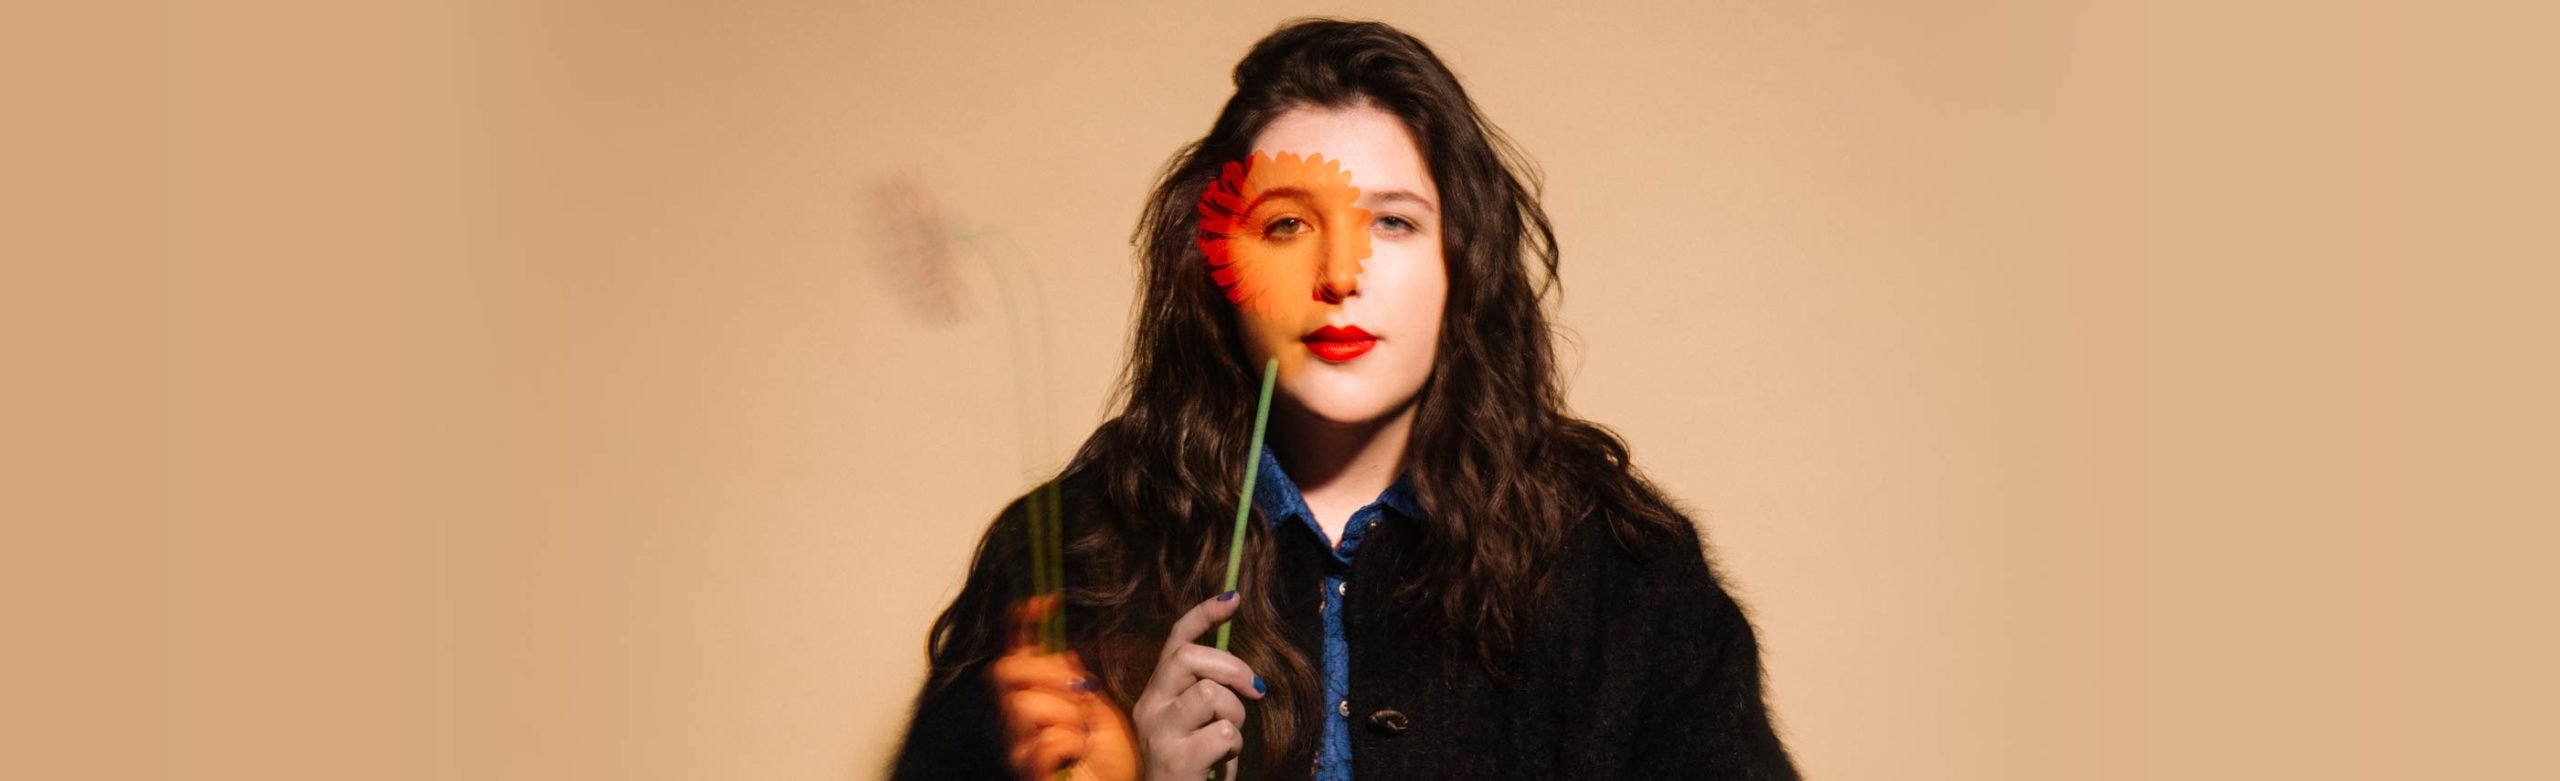 CANCELED: Lucy Dacus